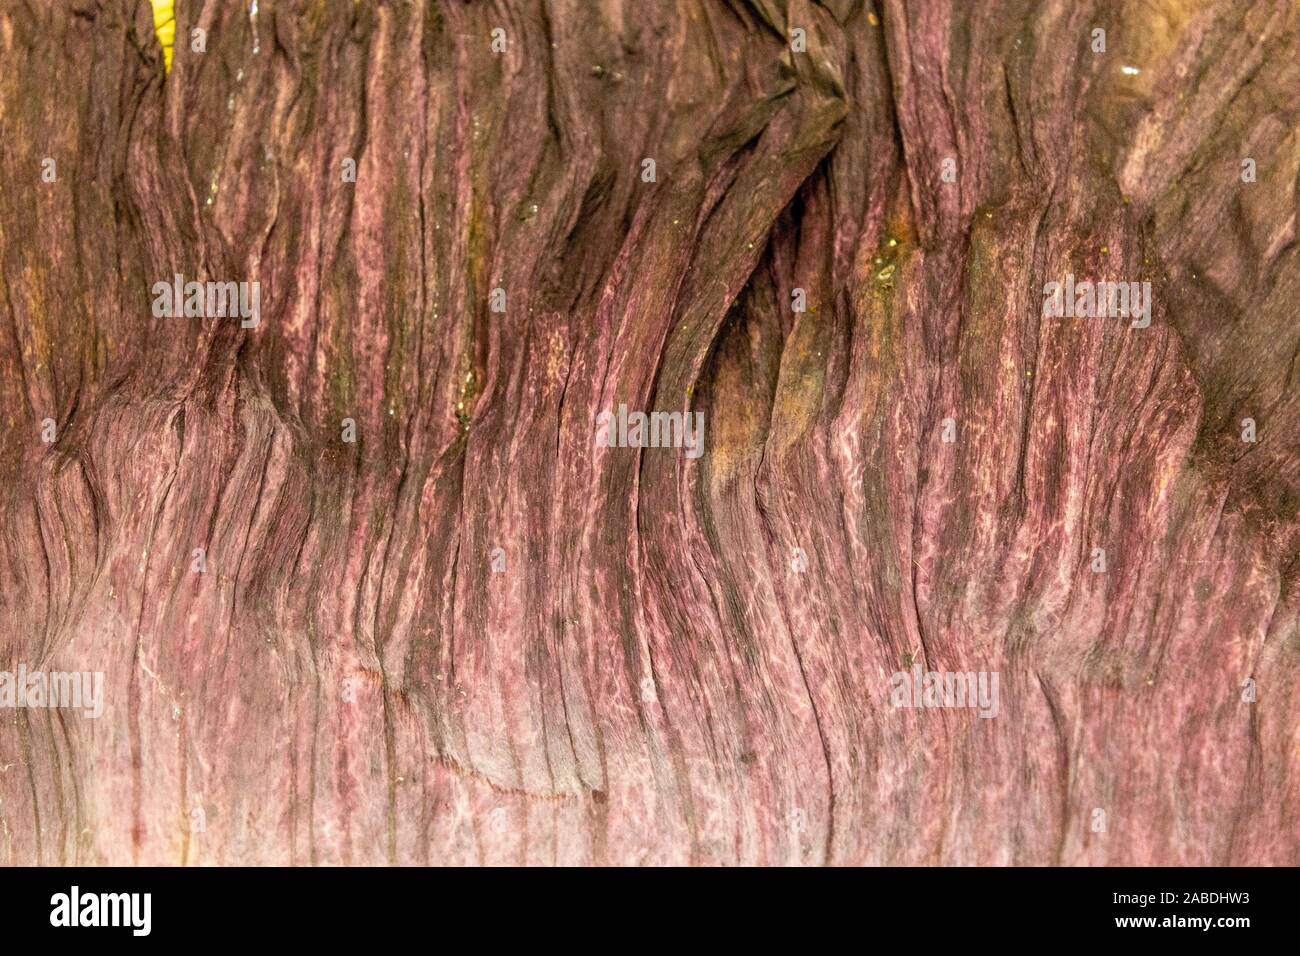 Amorphophallus titanum petal texture,Titan arum petal texture,A flowering plant with the largest unbranched inflorescence in the world Stock Photo